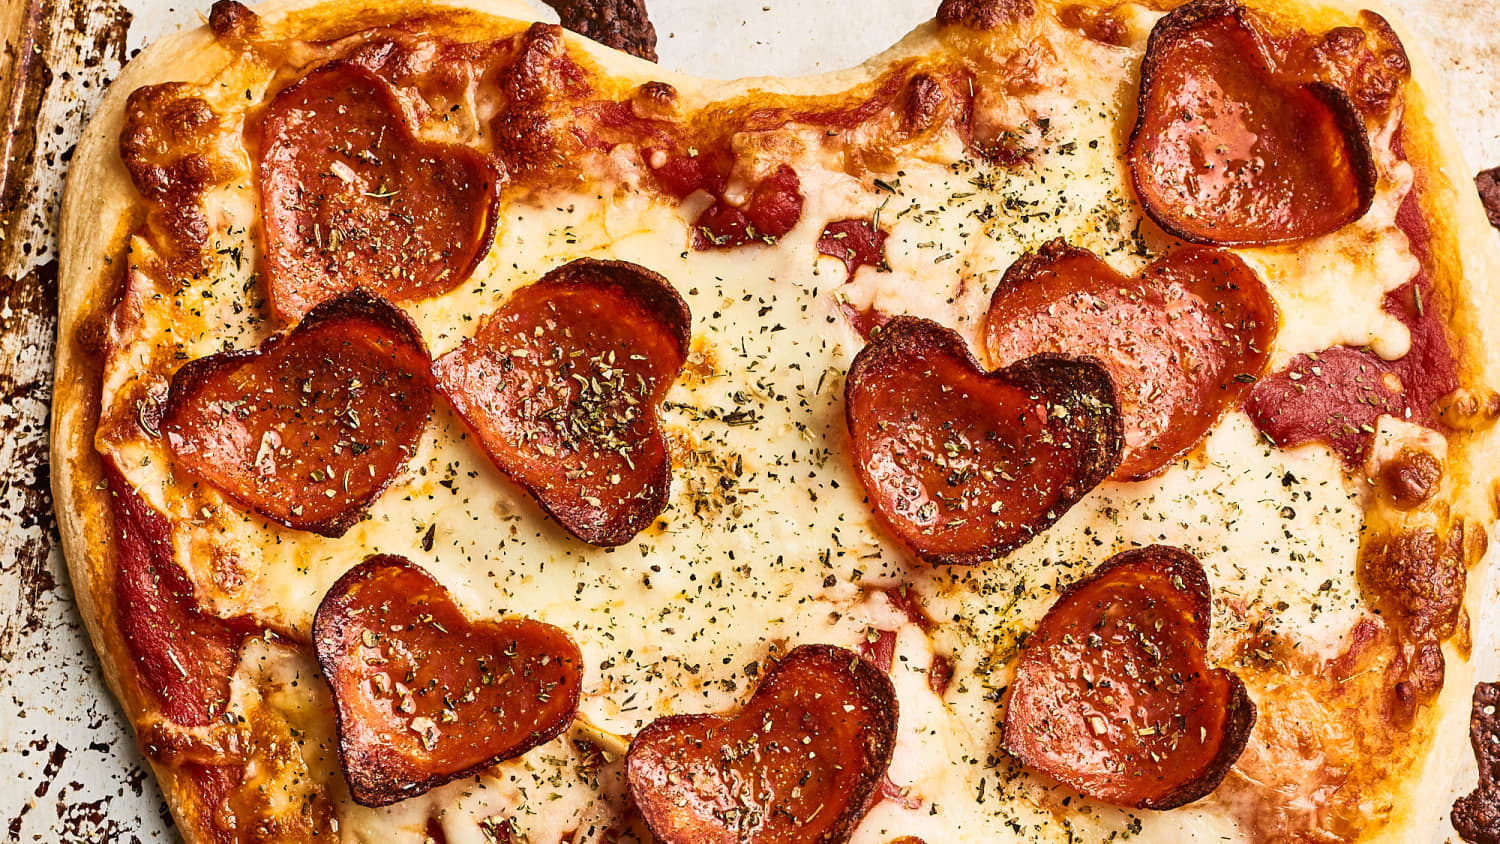 Heart-Shaped Pizza Recipe - How To Make At Home Or Order In - Brit + Co